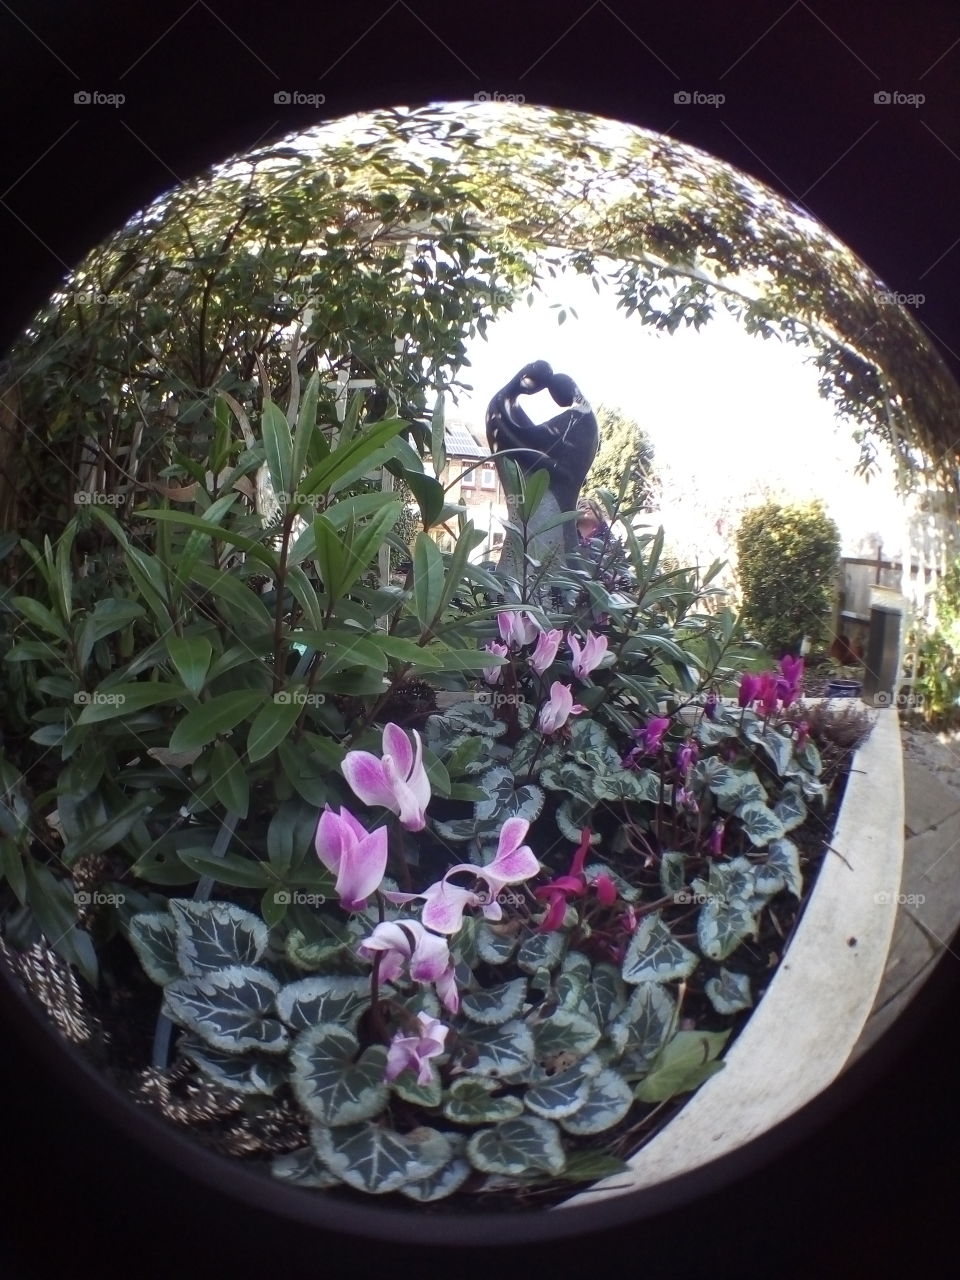 garden, wide angle, flowers, statue